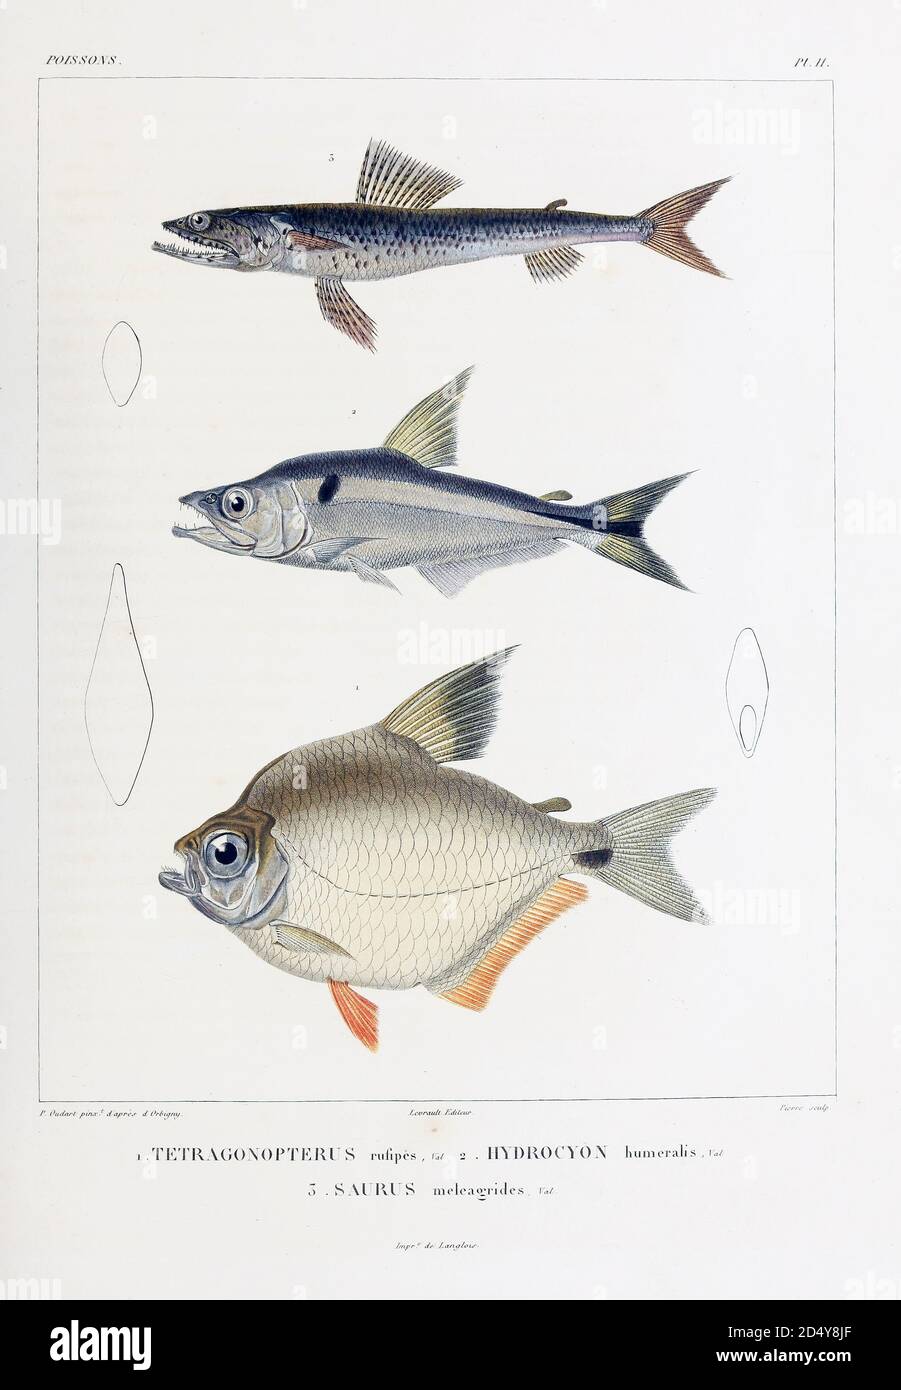 Species of South American fish. hand coloured sketch From the book 'Voyage dans l'Amérique Méridionale' [Journey to South America: (Brazil, the eastern republic of Uruguay, the Argentine Republic, Patagonia, the republic of Chile, the republic of Bolivia, the republic of Peru), executed during the years 1826 - 1833] Volume 5 Part 1 By: Orbigny, Alcide Dessalines d', d'Orbigny, 1802-1857; Montagne, Jean François Camille, 1784-1866; Martius, Karl Friedrich Philipp von, 1794-1868 Published Paris :Chez Pitois-Levrault. Publishes in Paris in 1847 Stock Photo